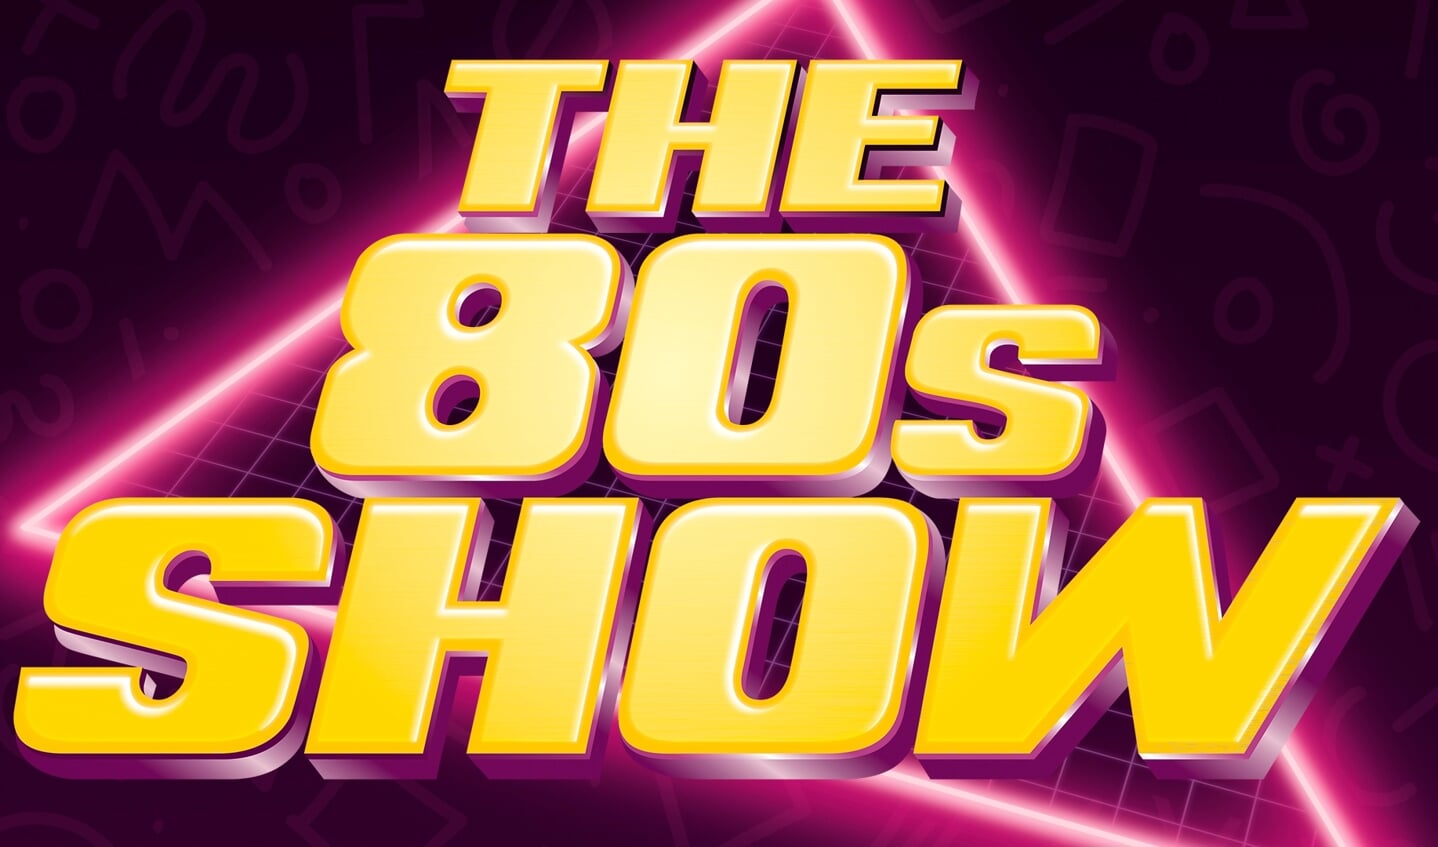 The 80s show